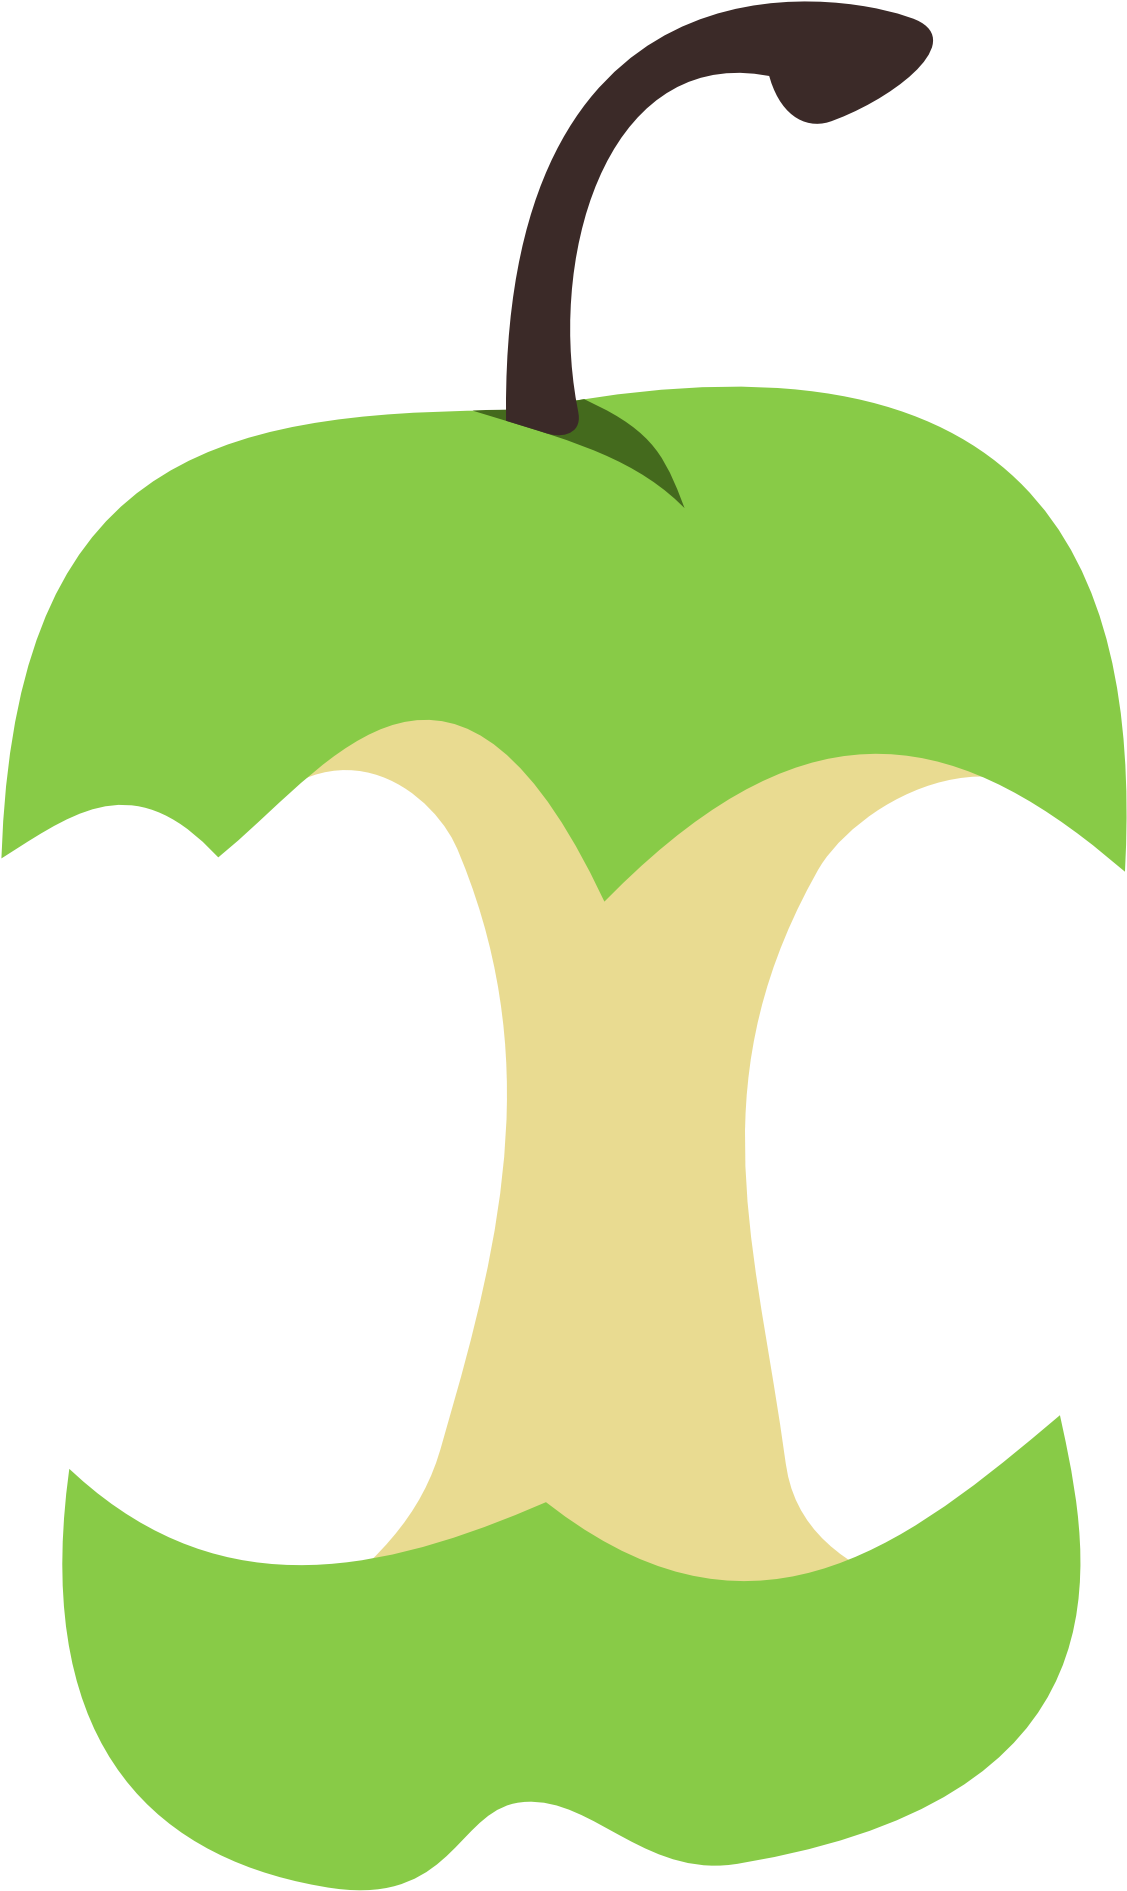 Red Apple Core With Shadow - Green Apple Cutie Mark (1251x2000)